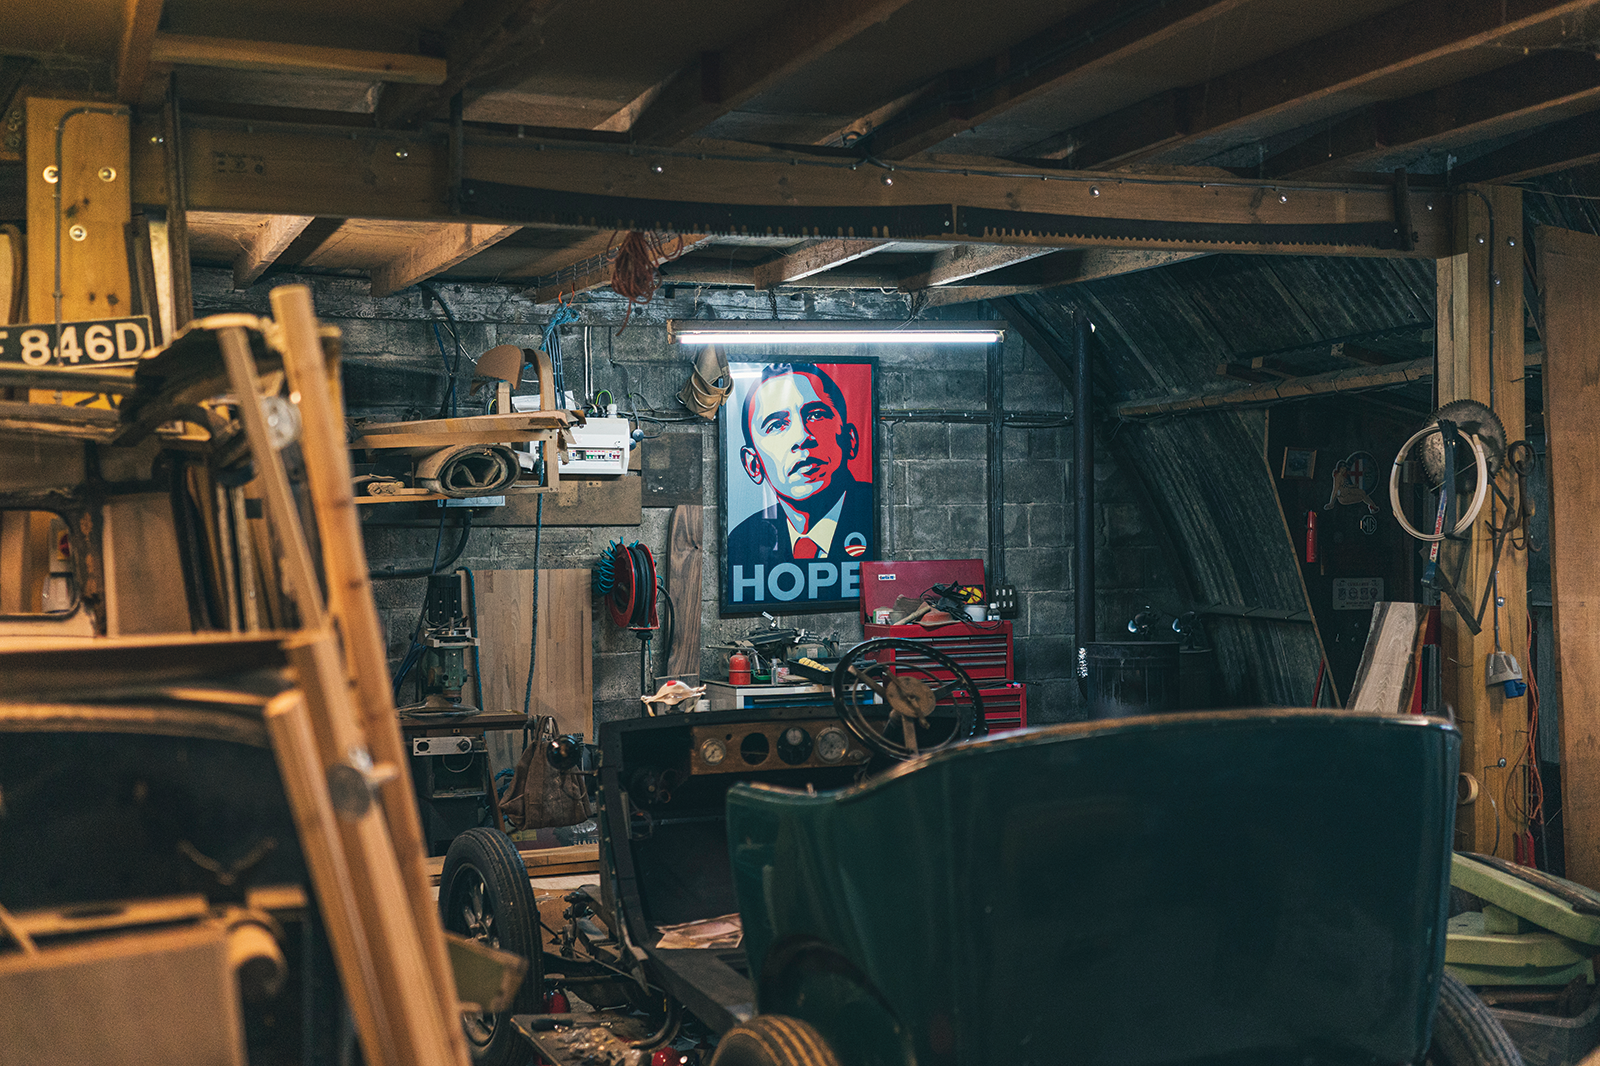 Classic & Sports Car – The specialist: Sowerby Coachworks & Veneering